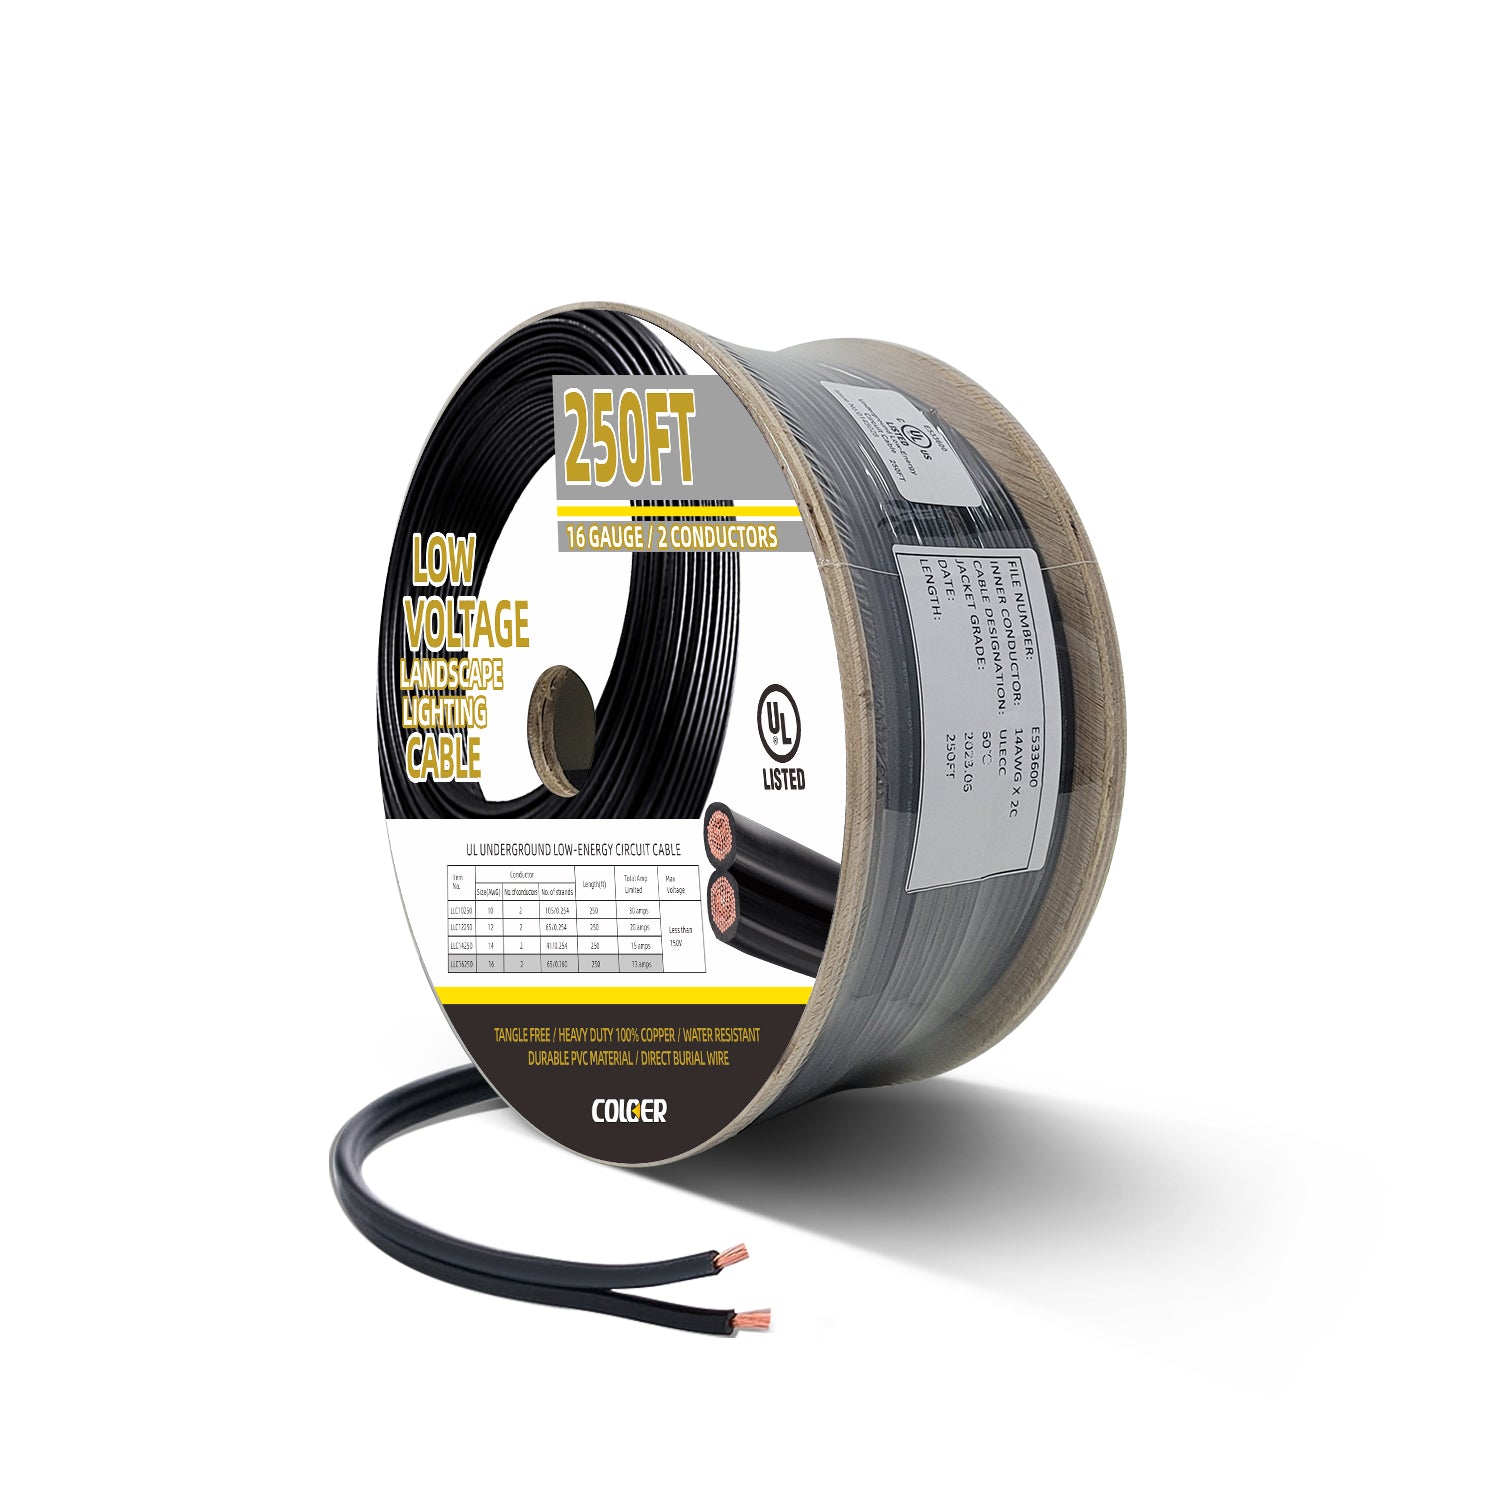 16 Gauge Low Voltage Pure Copper Landscape Wire, 250 feet roll with 2 conductors for outdoor direct burial, UL listed, by COLOER